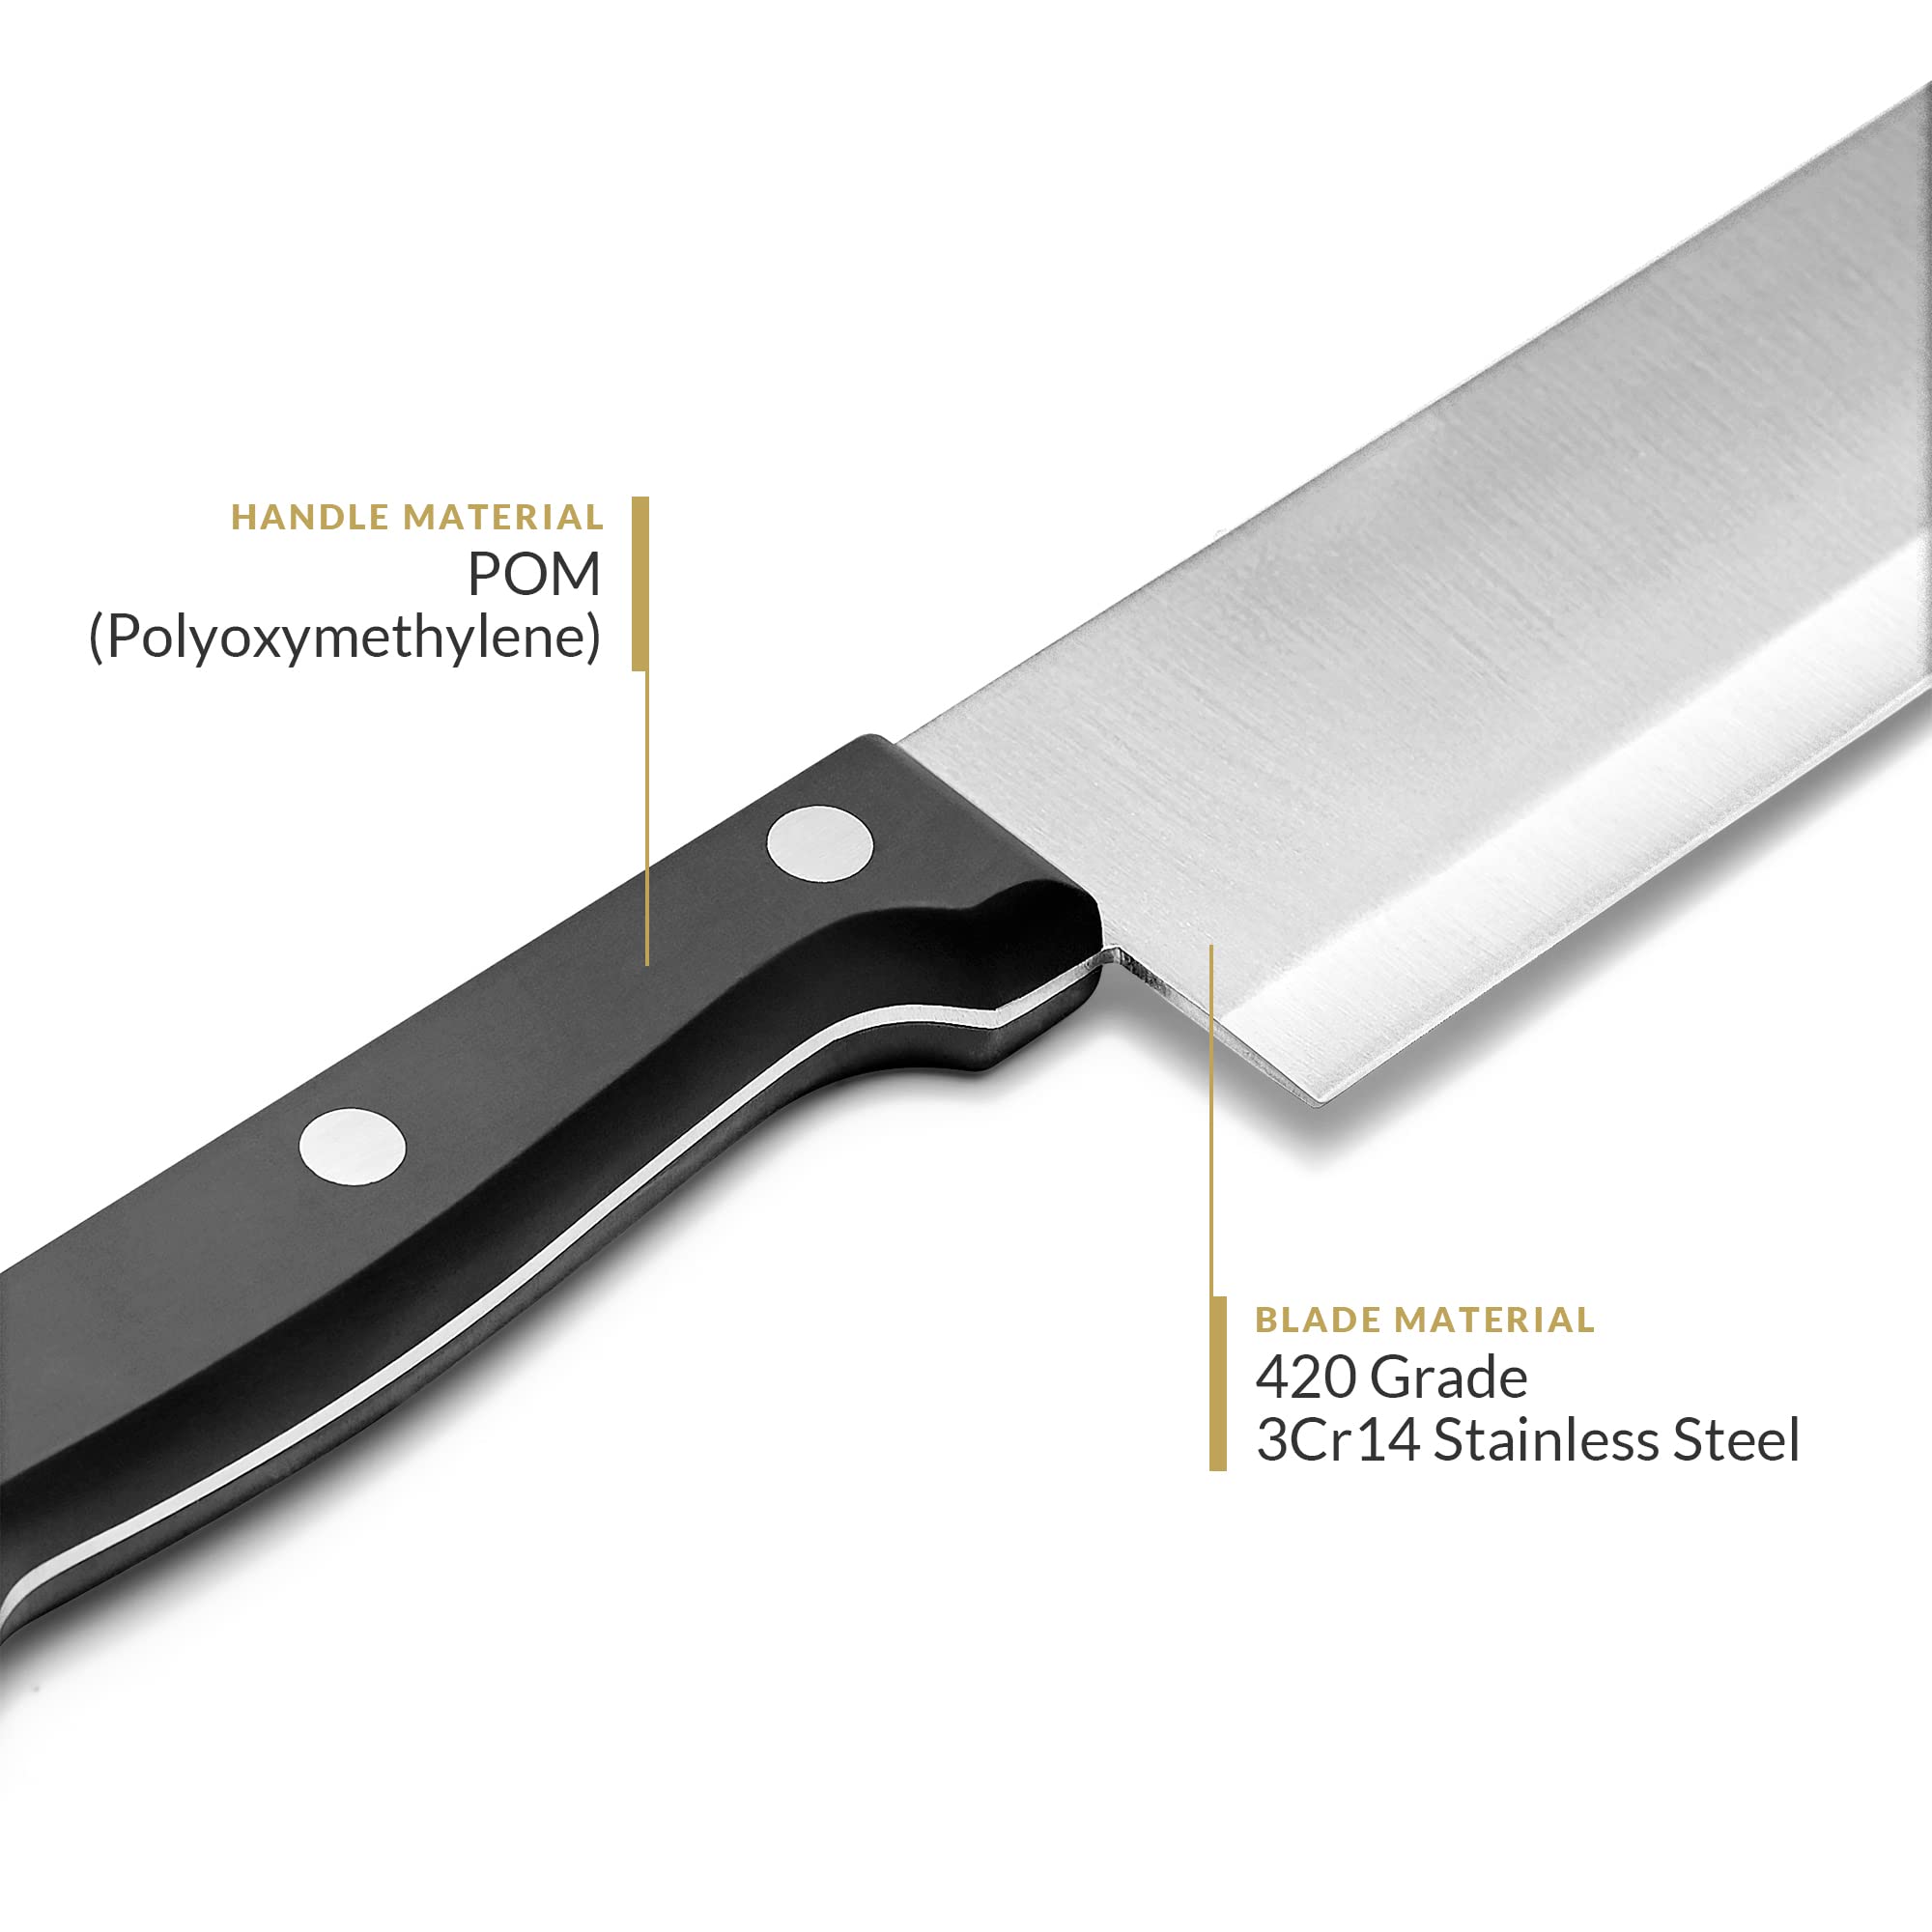 Humbee - Cuisine Pro Chef Knife 6 Inches - Stainless Steel Full Tang Blade for Professional and Personal Use - Ergonomic Handle, Comfortable Grip - Dishwasher Safe, NSF Certified